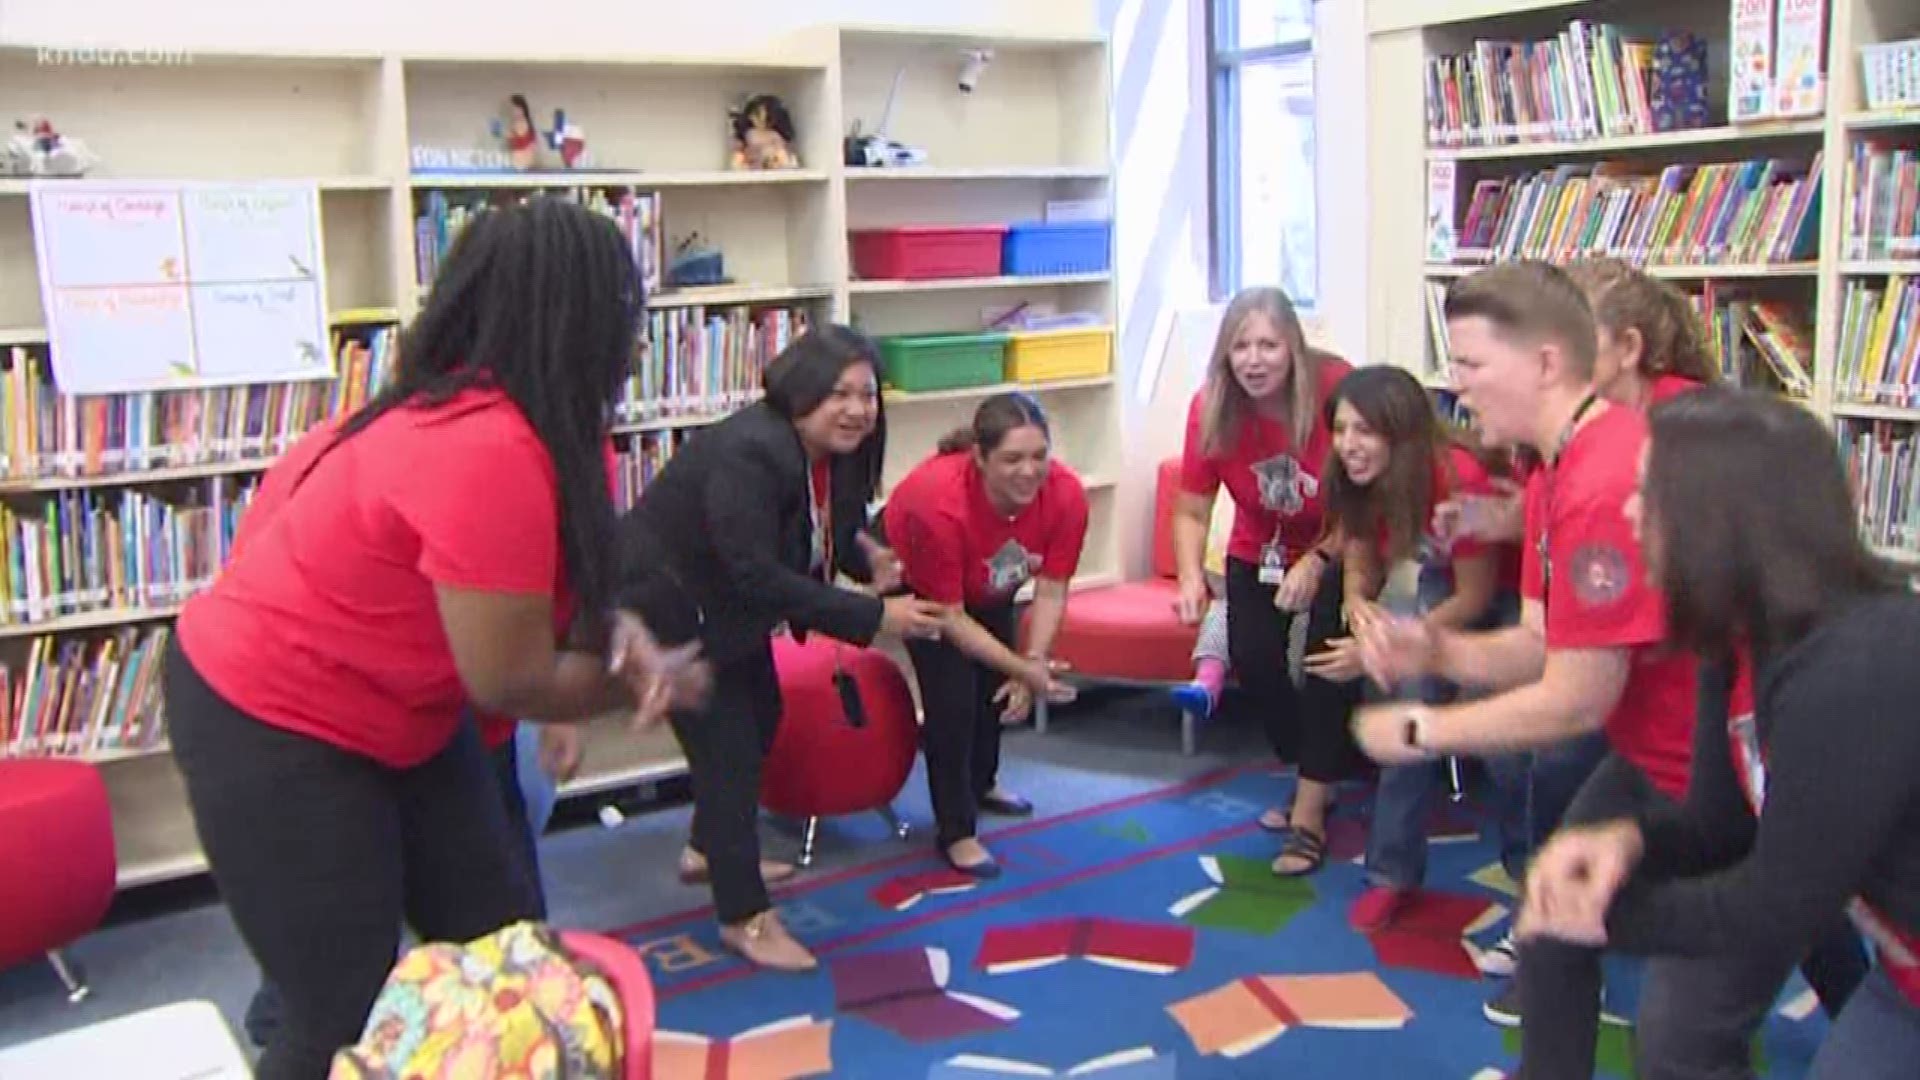 Goodman and Worsham elementary schools are rolling out a new program that will give students an extended school day for extra social and emotional support.